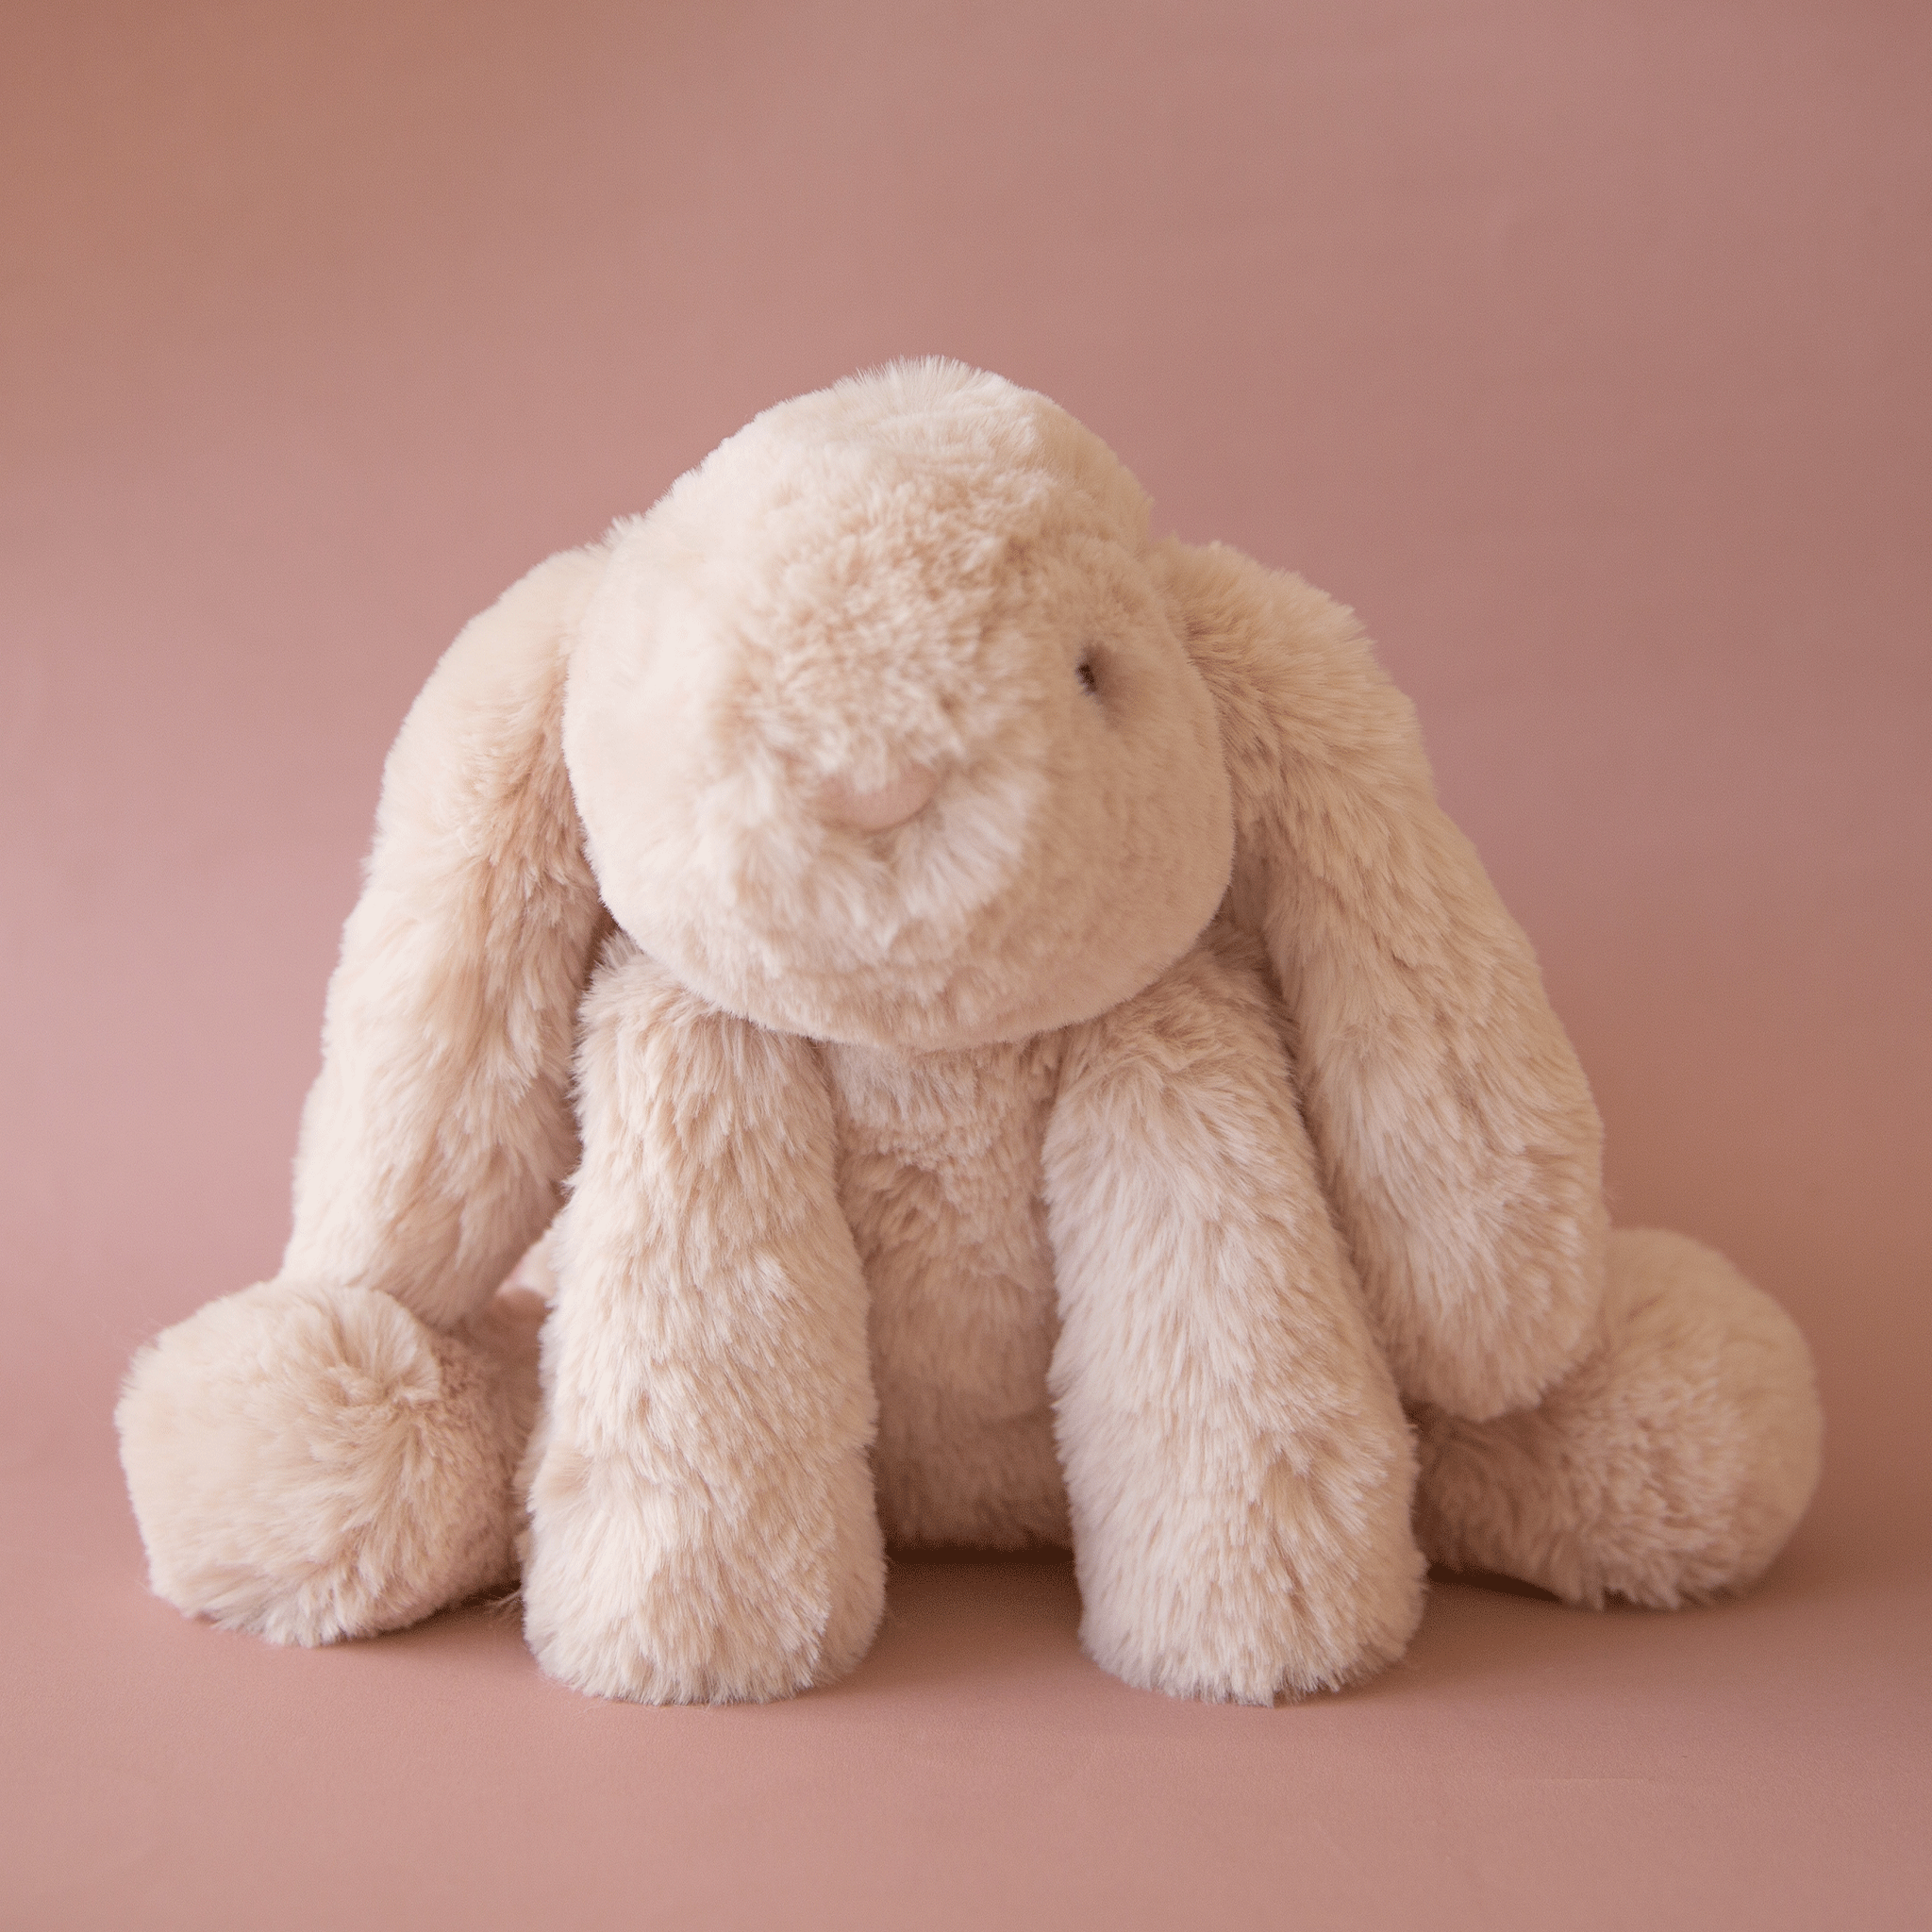 On a pink background is a tan / ivory bunny stuffed animal with floppy ears and a fluffy tail.